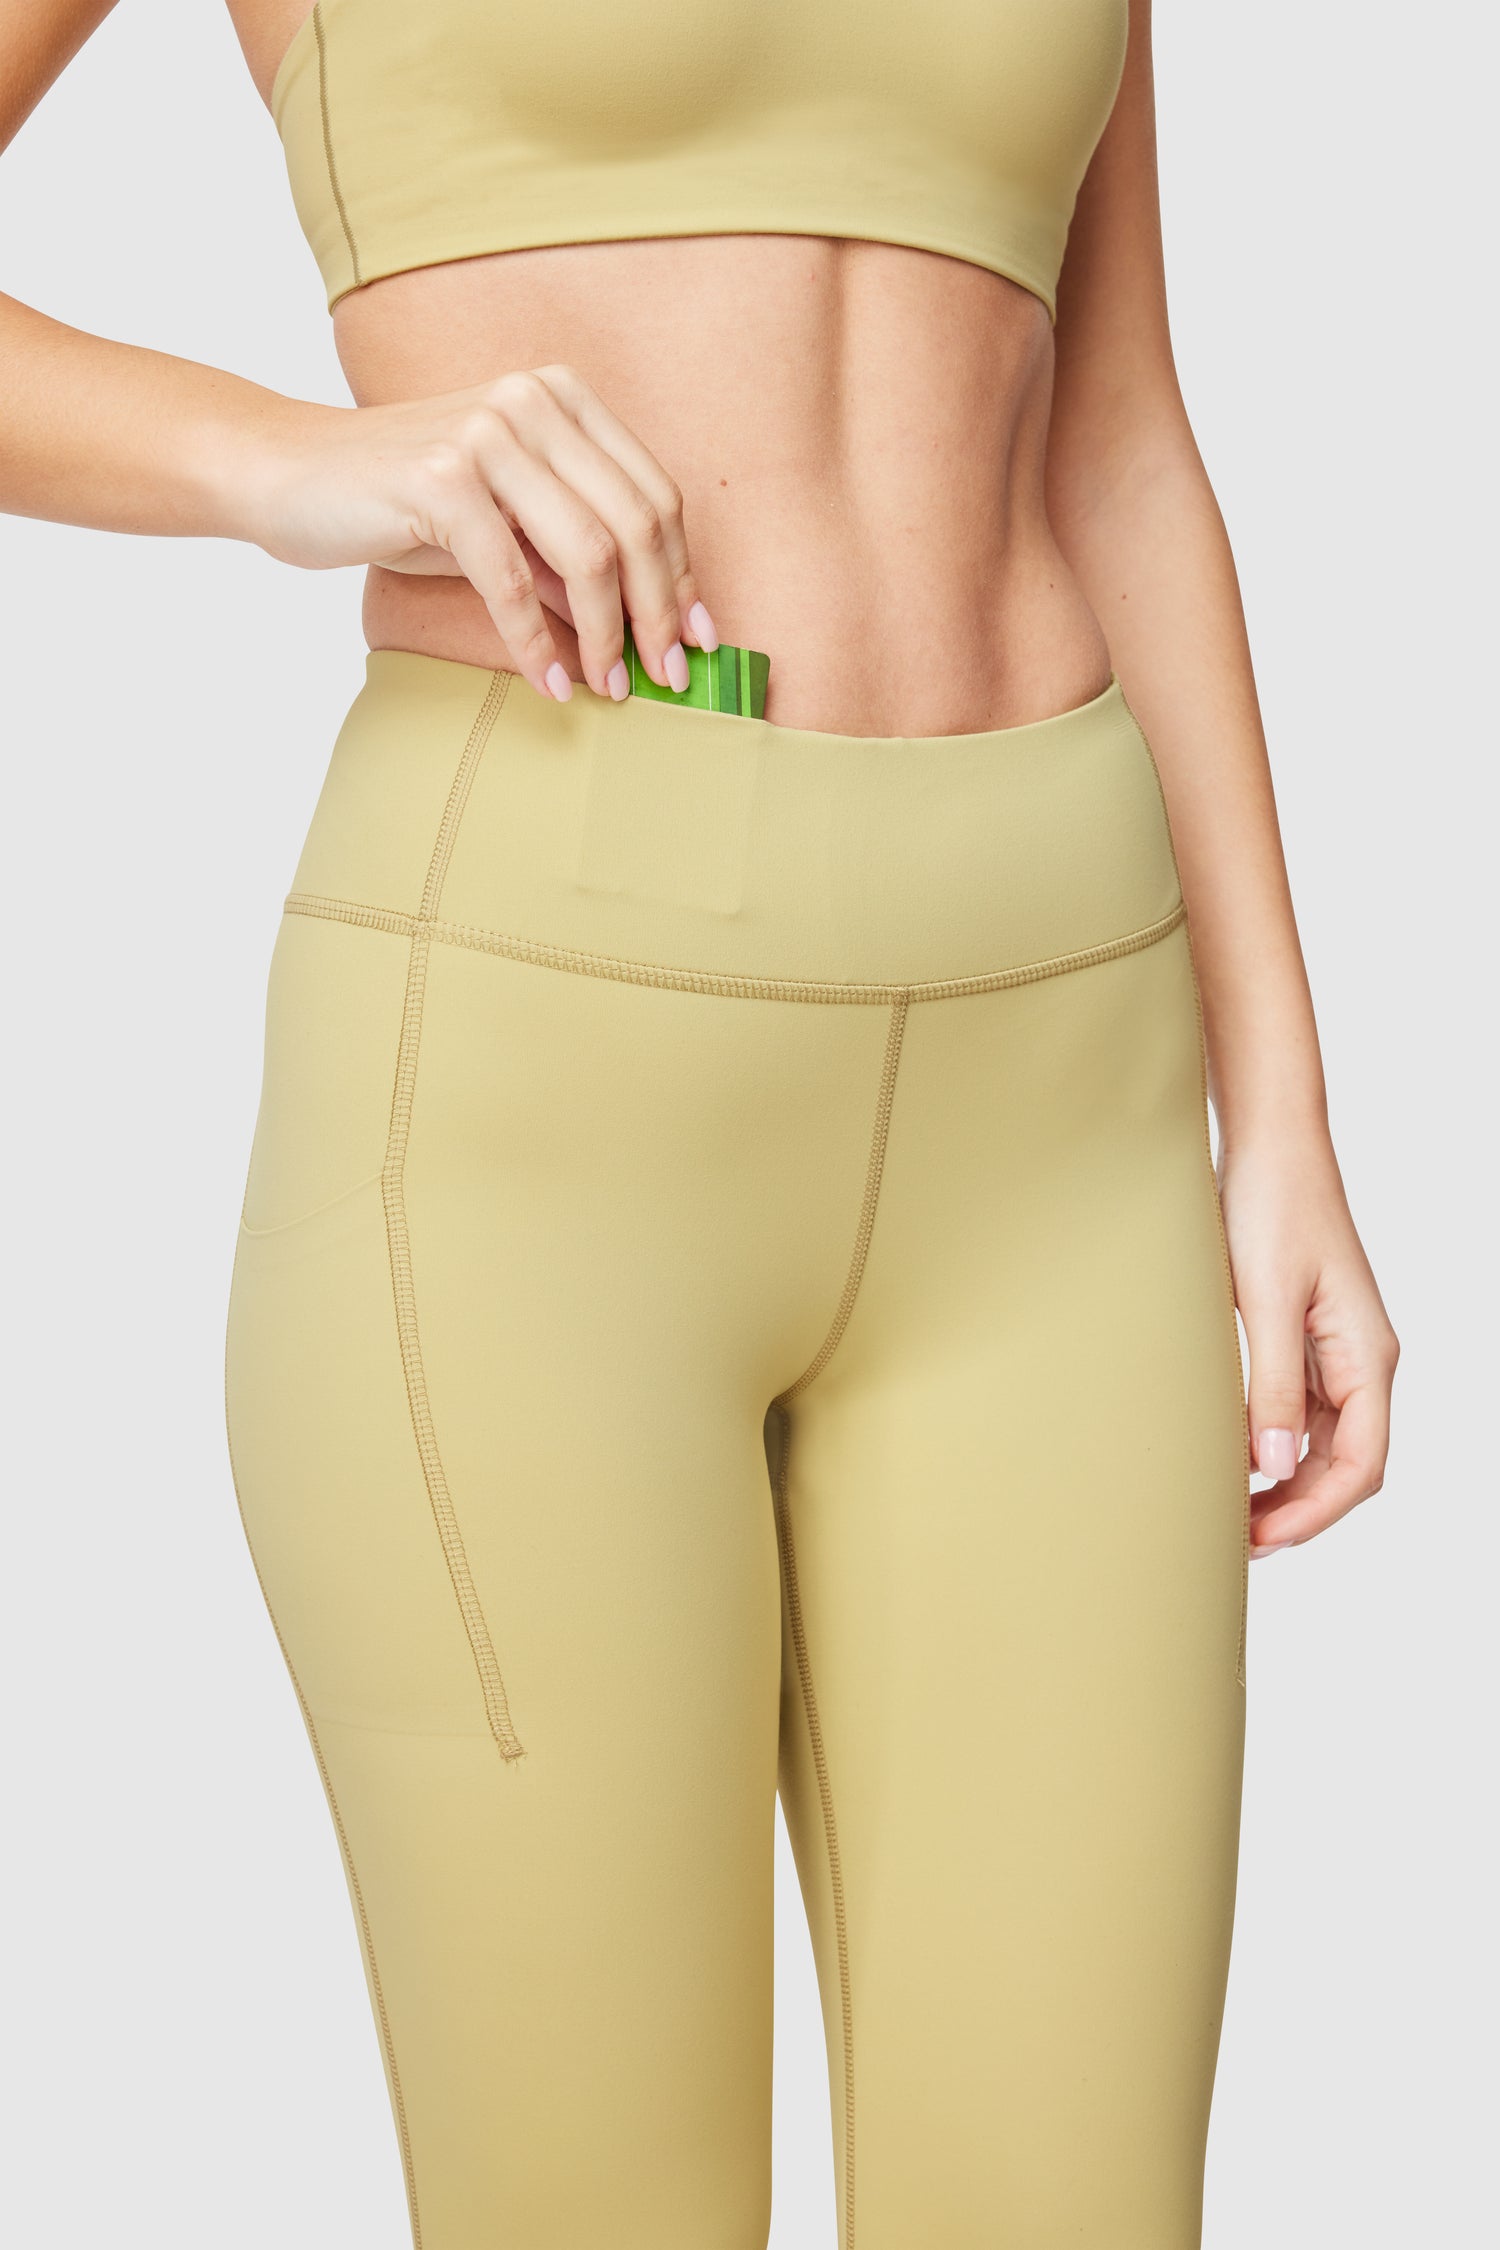 7/8 V-Cut Cooling Leggings with Pockets - Women's